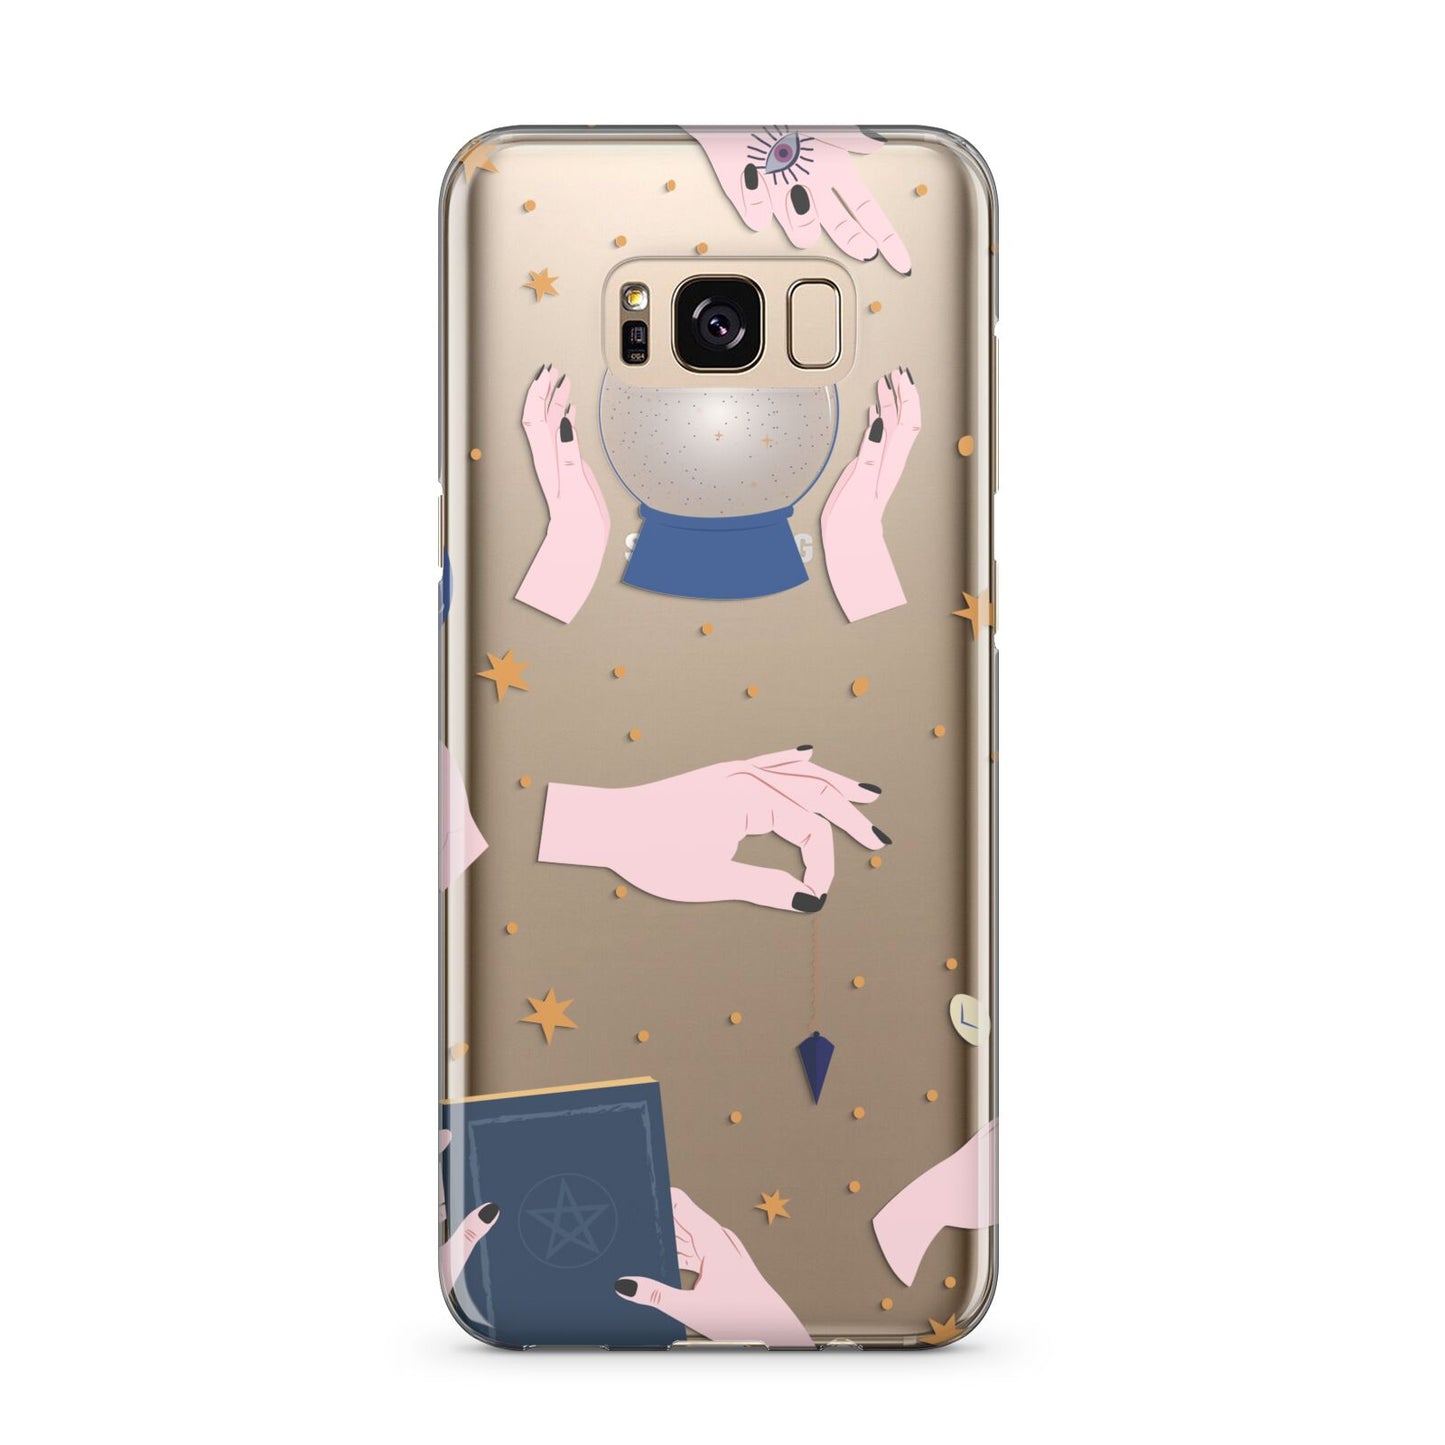 Clairvoyant Witches Hands Samsung Galaxy S8 Plus Case